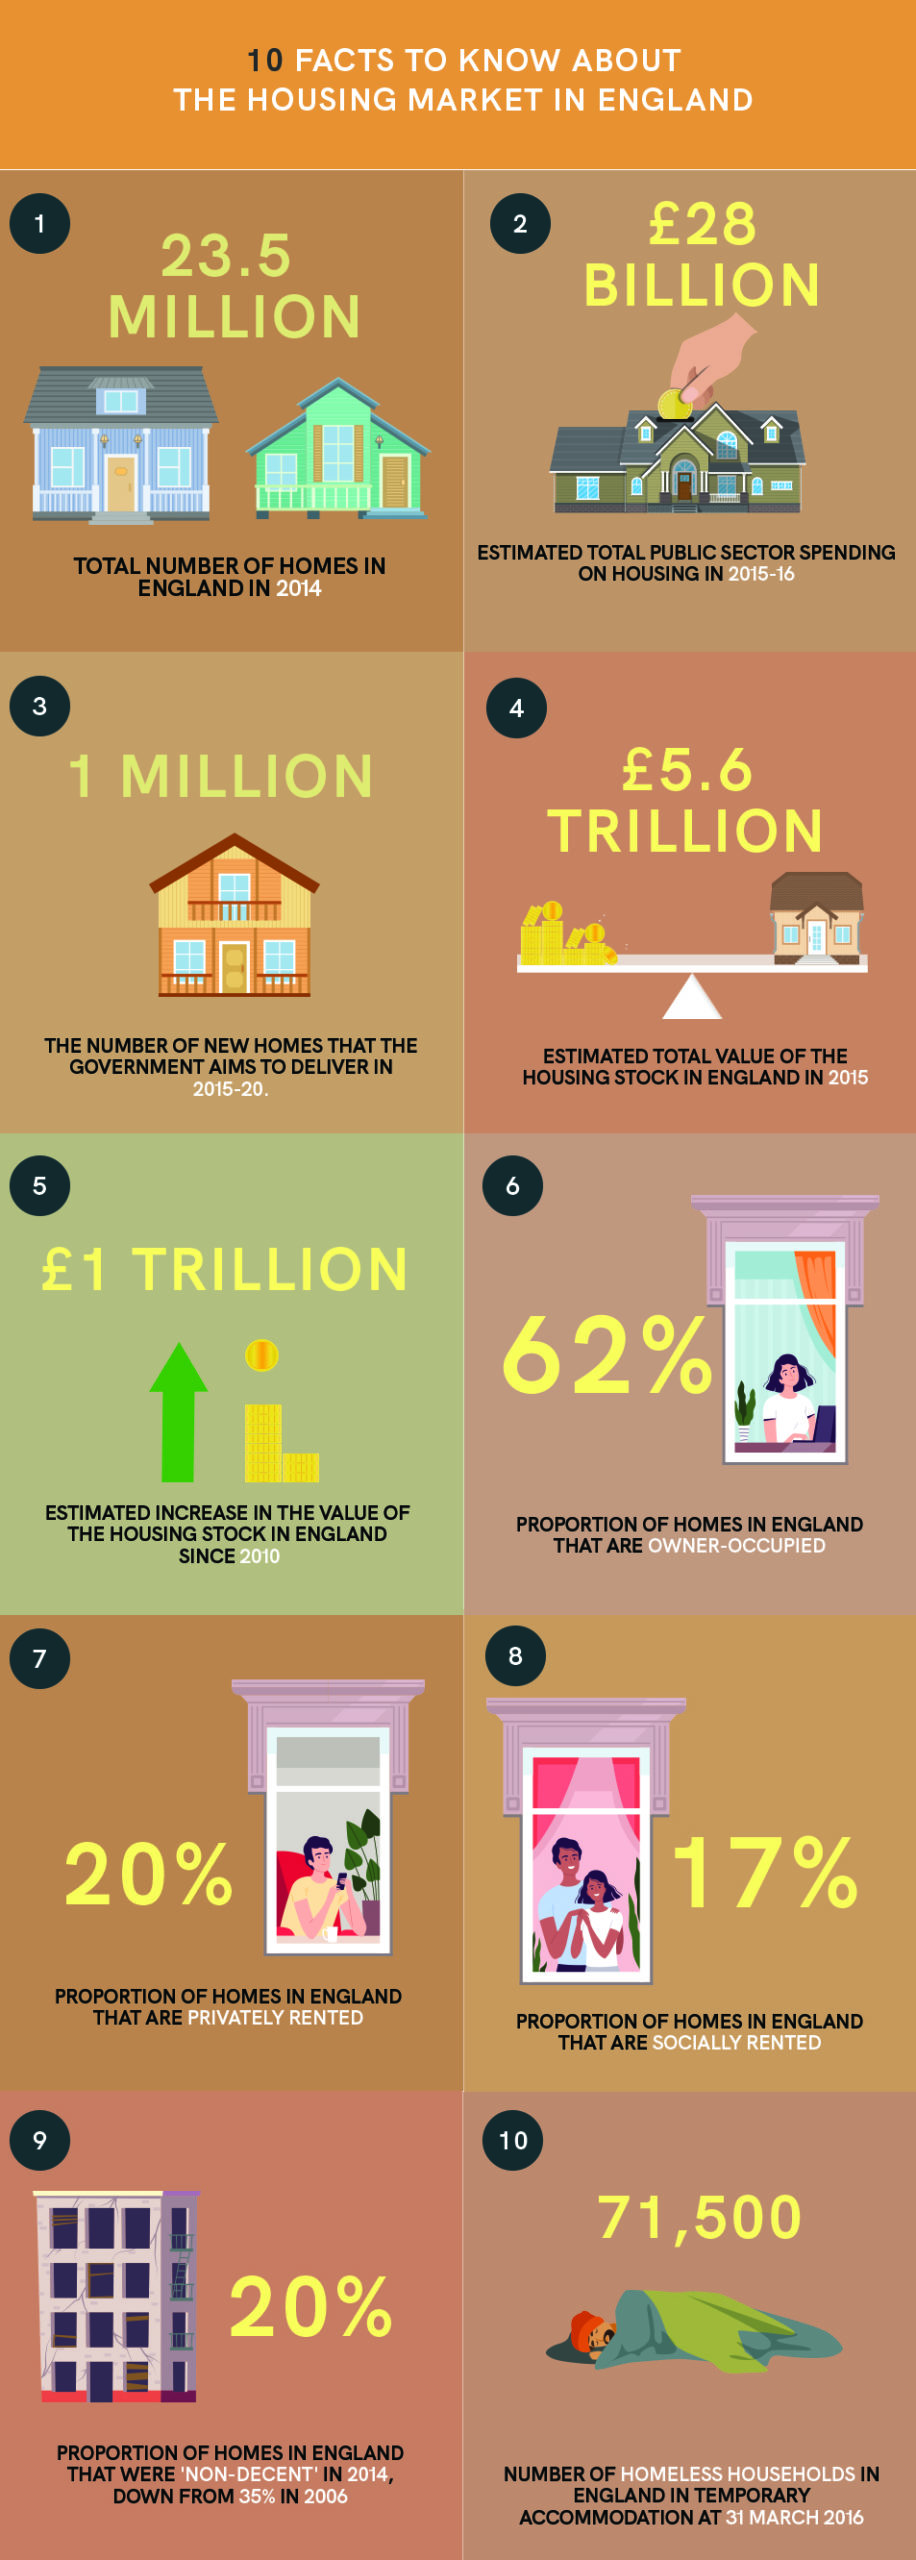 10 Facts: The Housing Market in England infographic